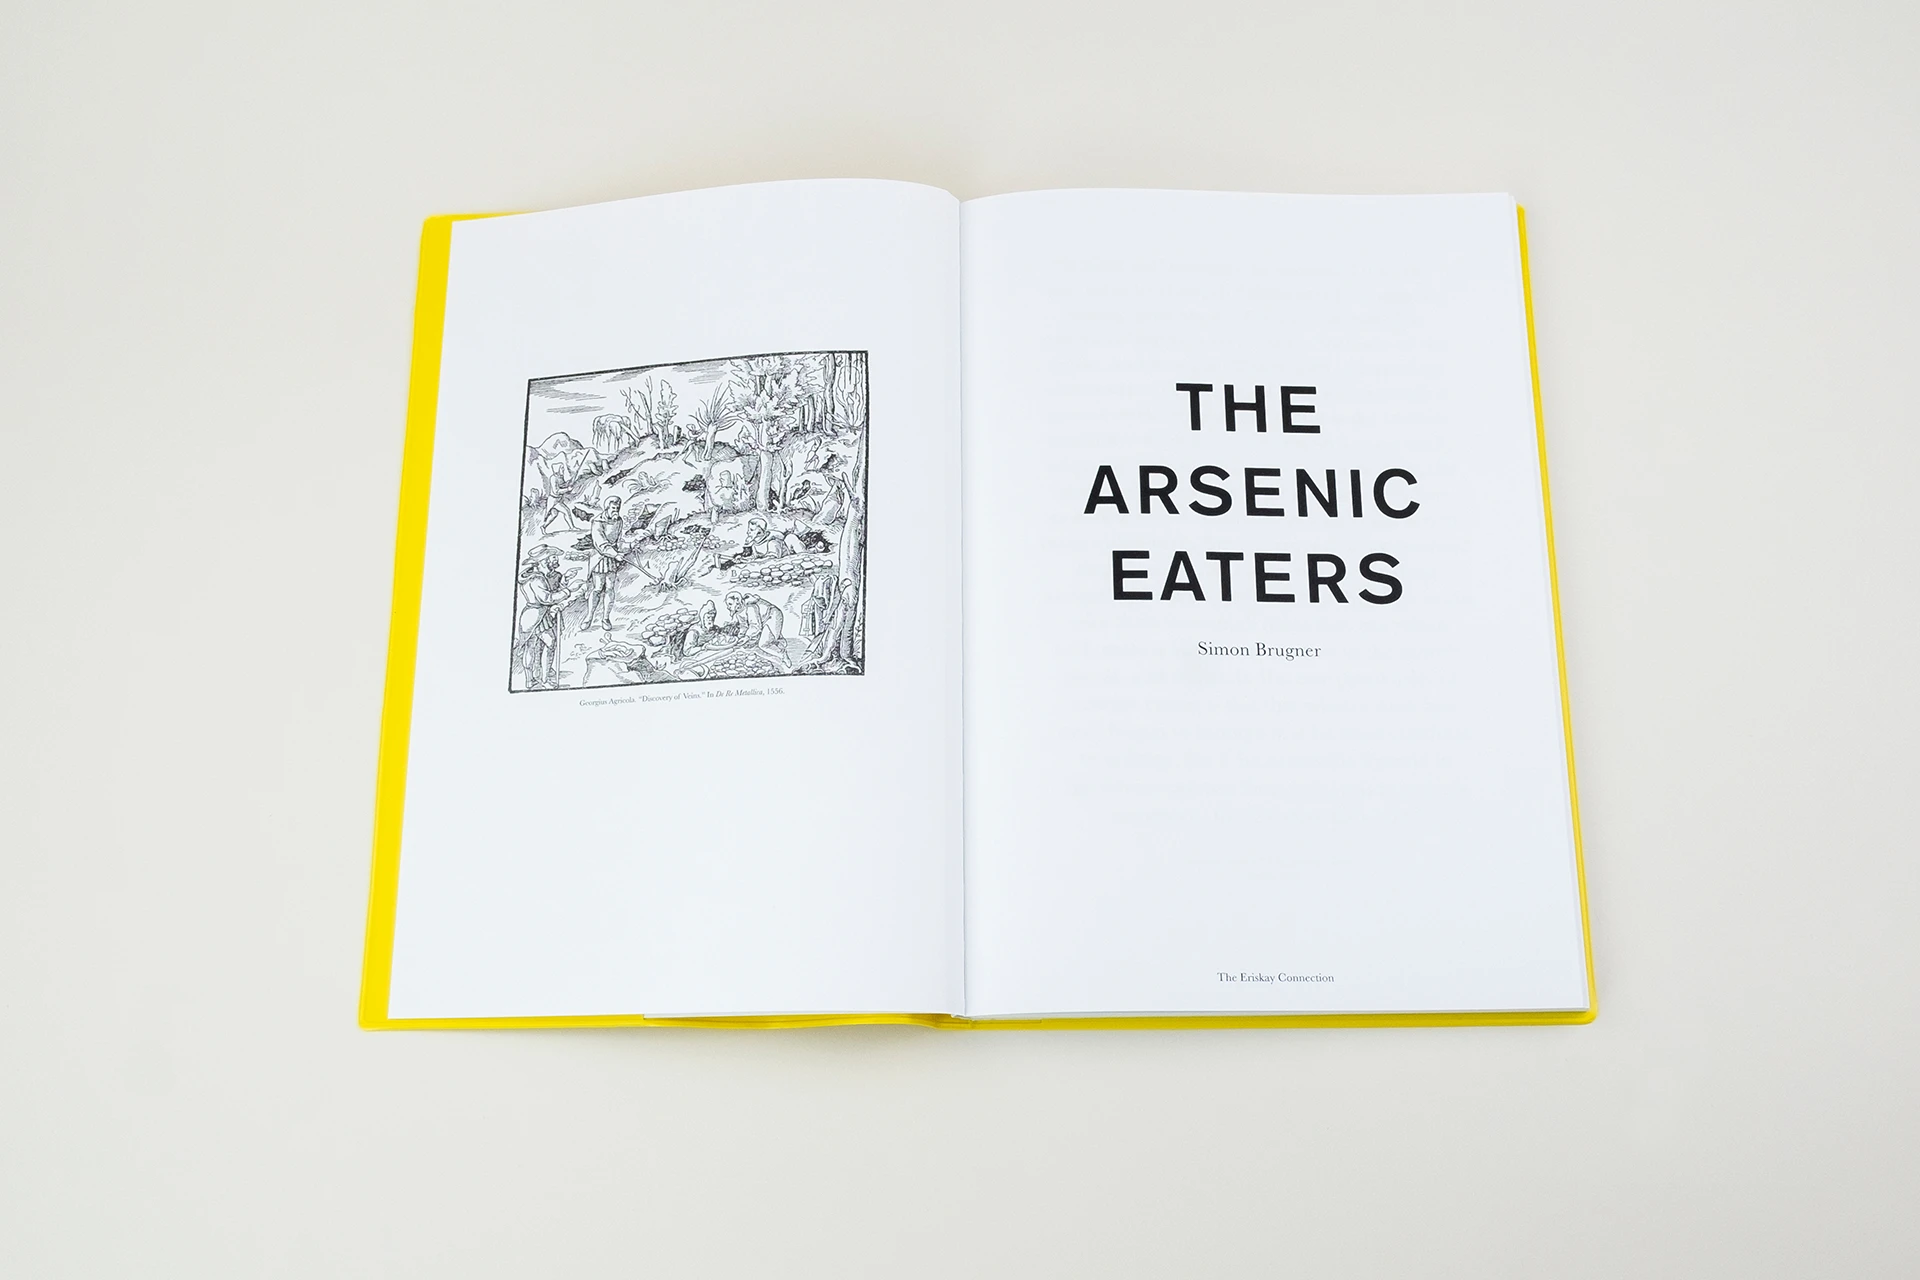 The Arsenic Eaters - The Eriskay Connection